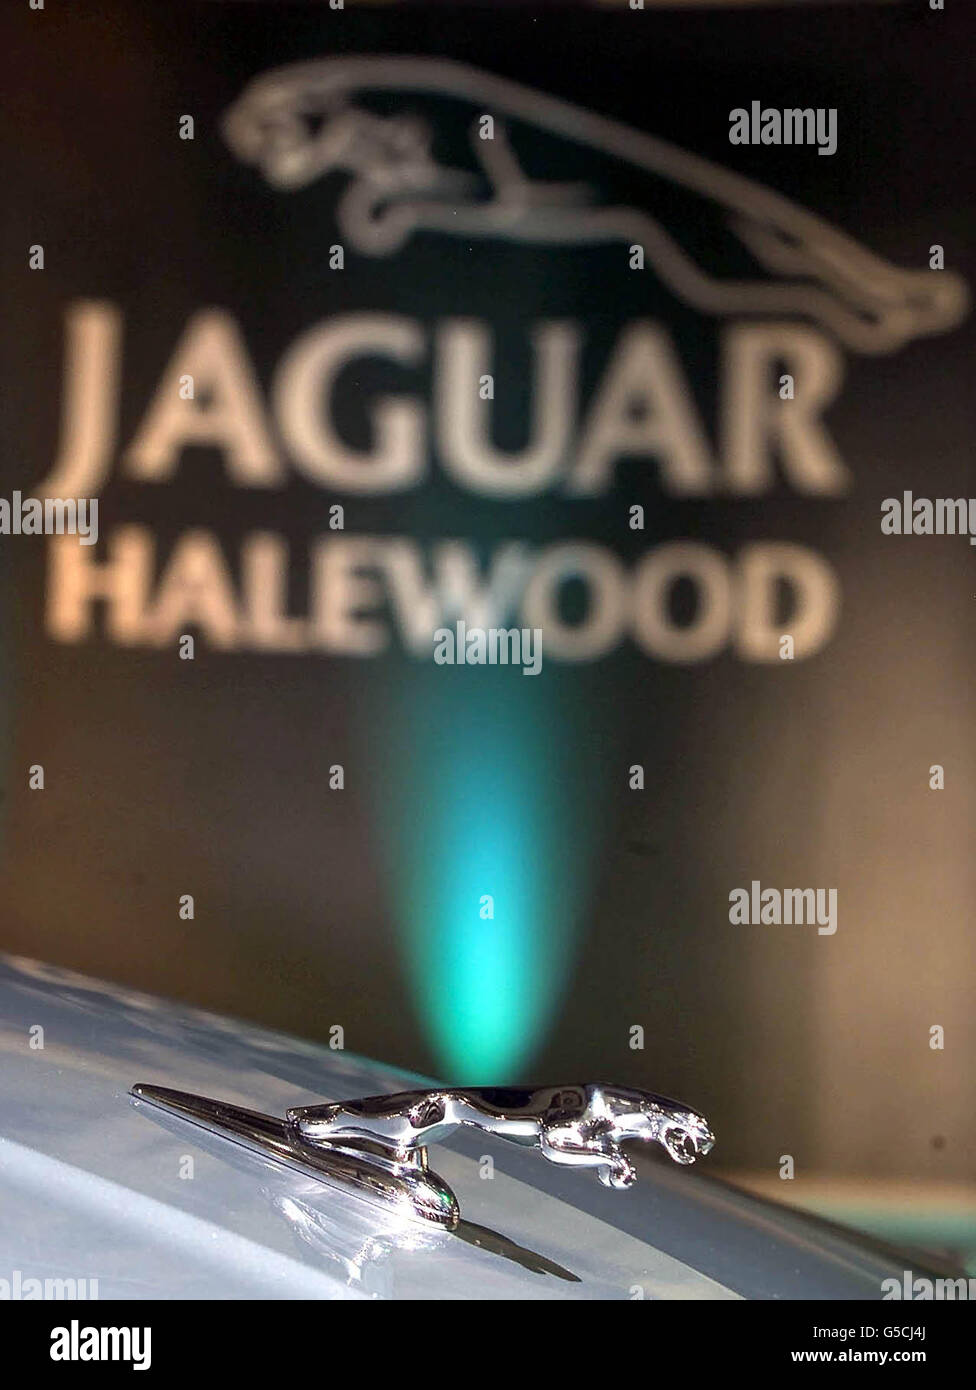 Official Opening Jaguar Plant Stock Photo